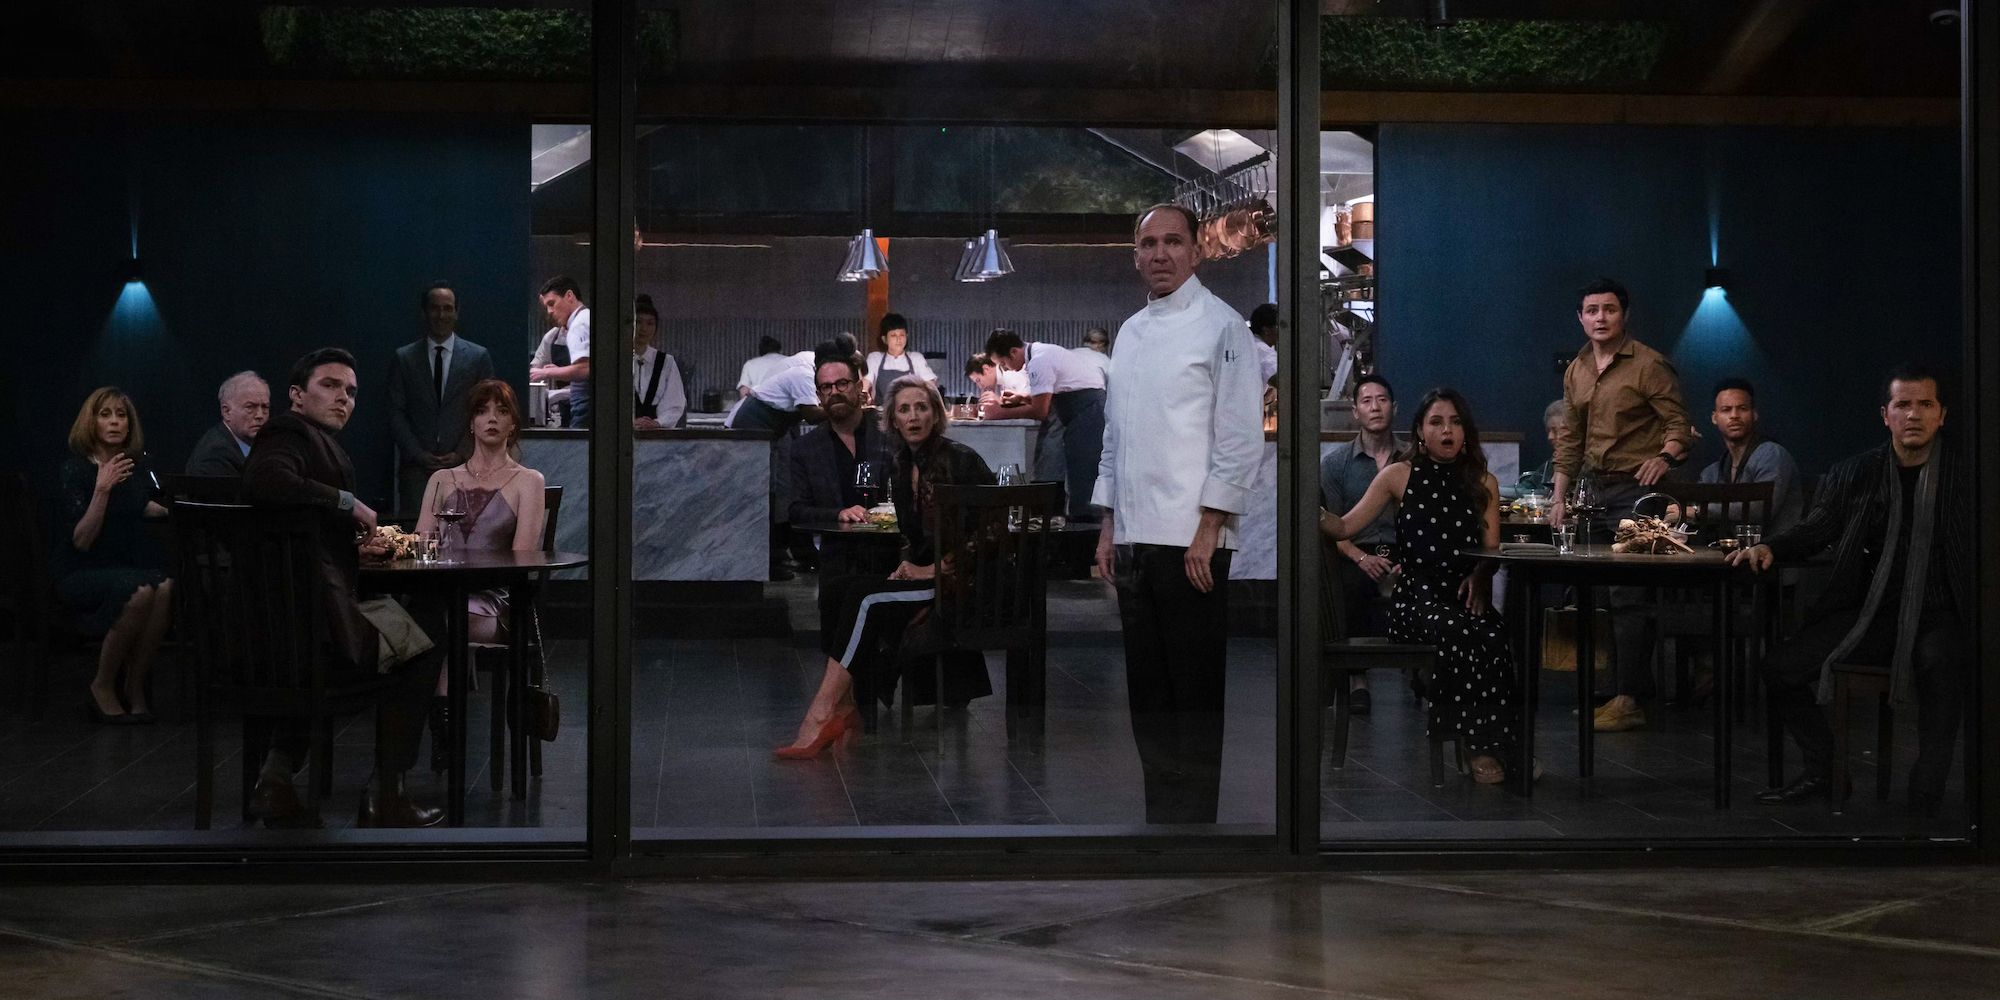 Chef Slowik and the guests look outside in The Menu